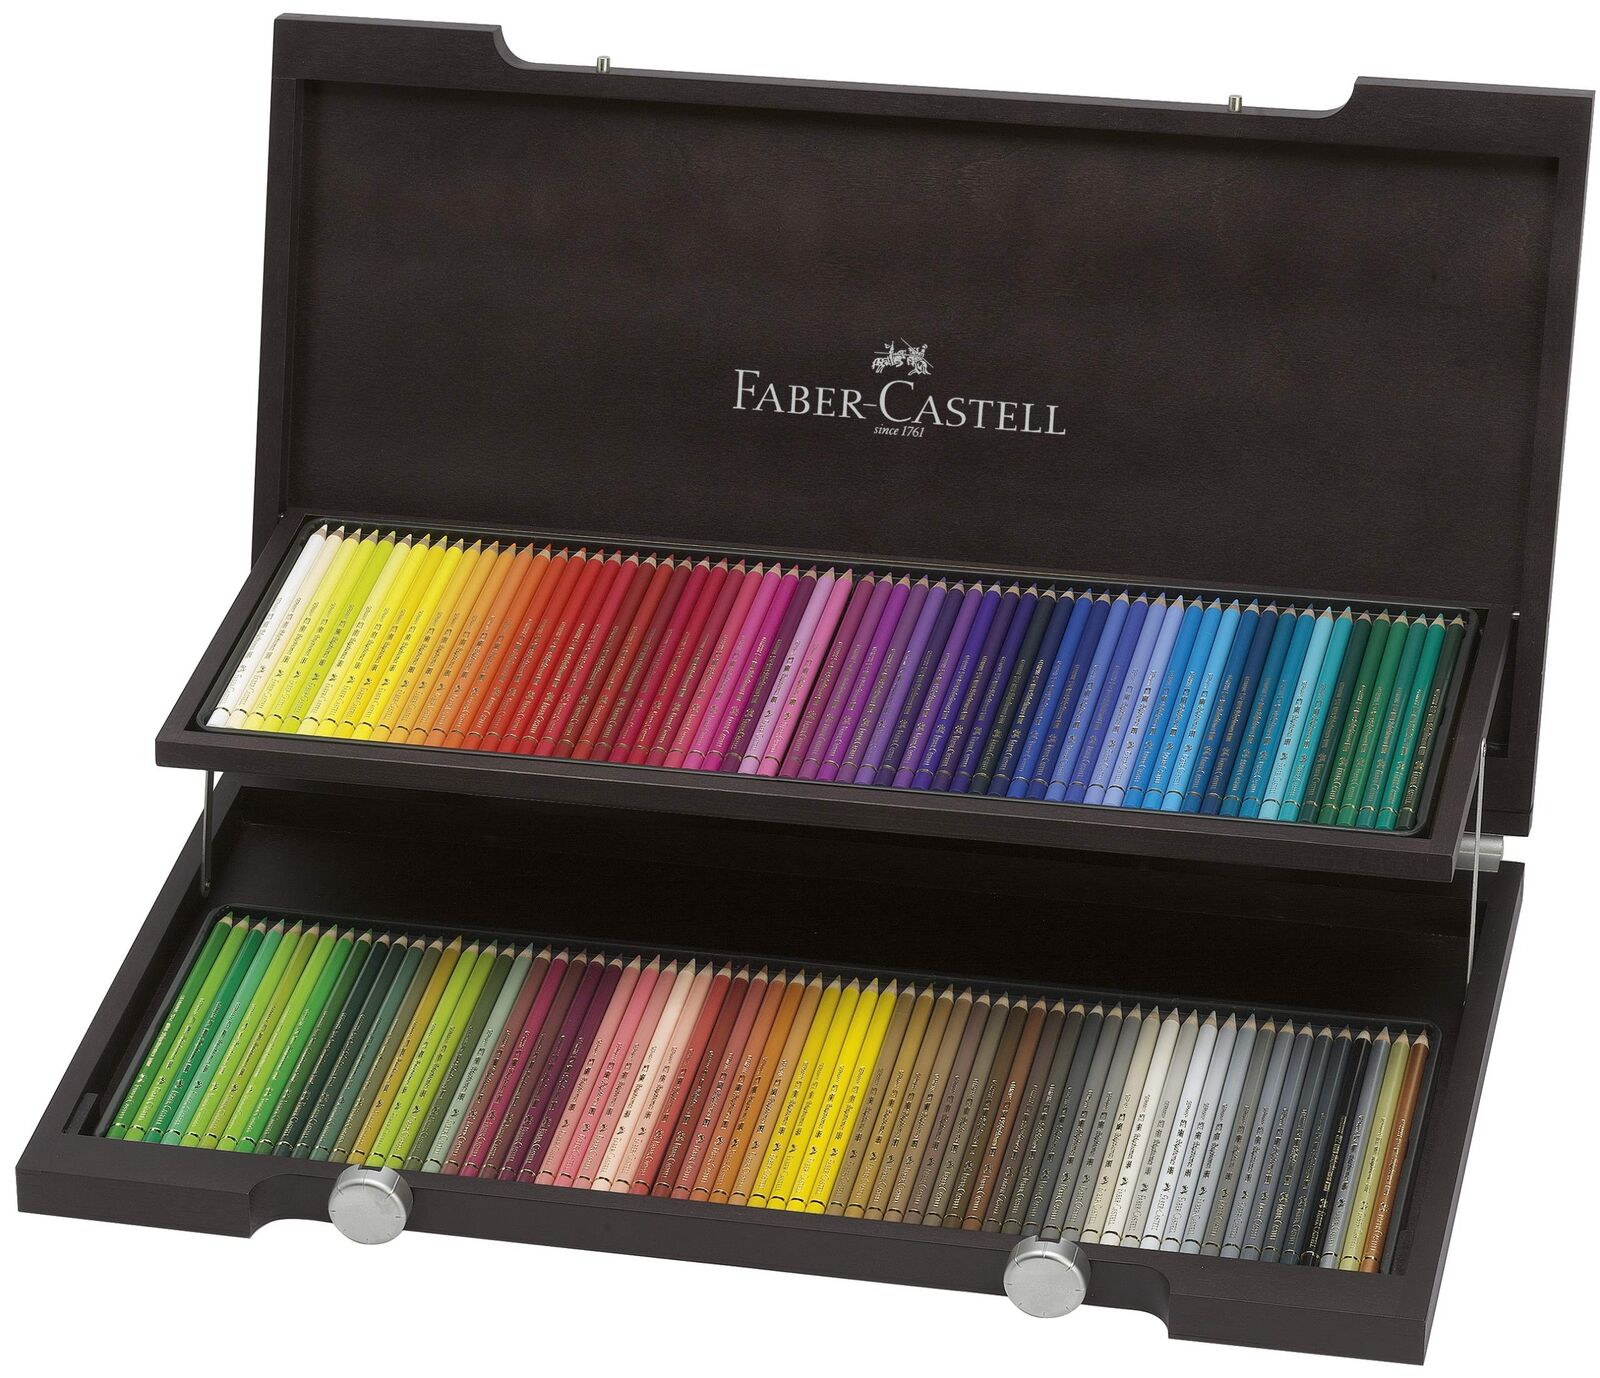 NEW Faber-Castell 120 Polychromos Colour Colouring Pencils Wooden Set Box Wood